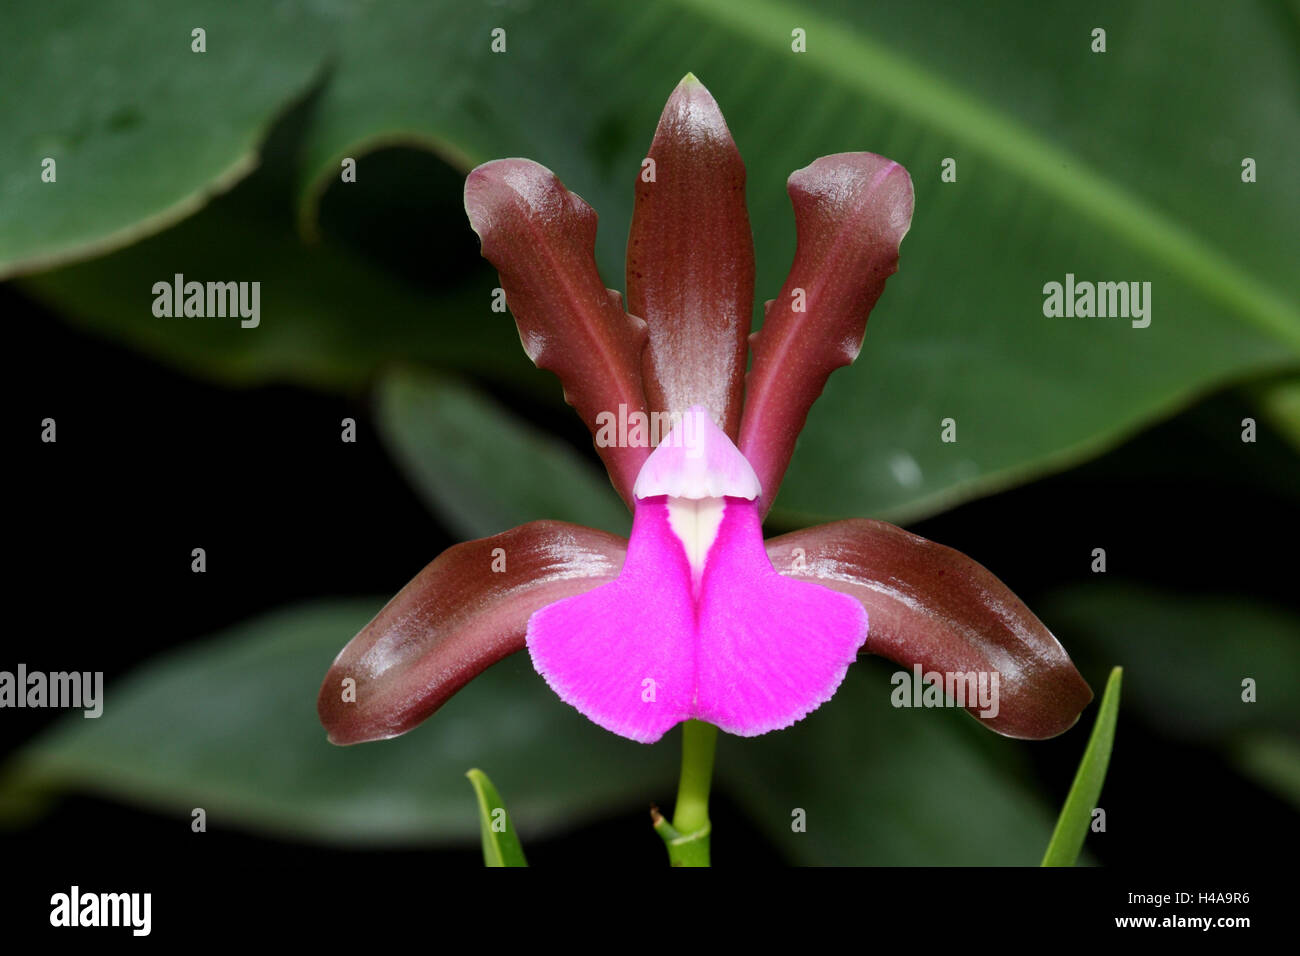 Orchid blossom, Cattleya bicolor Grossii, Stock Photo